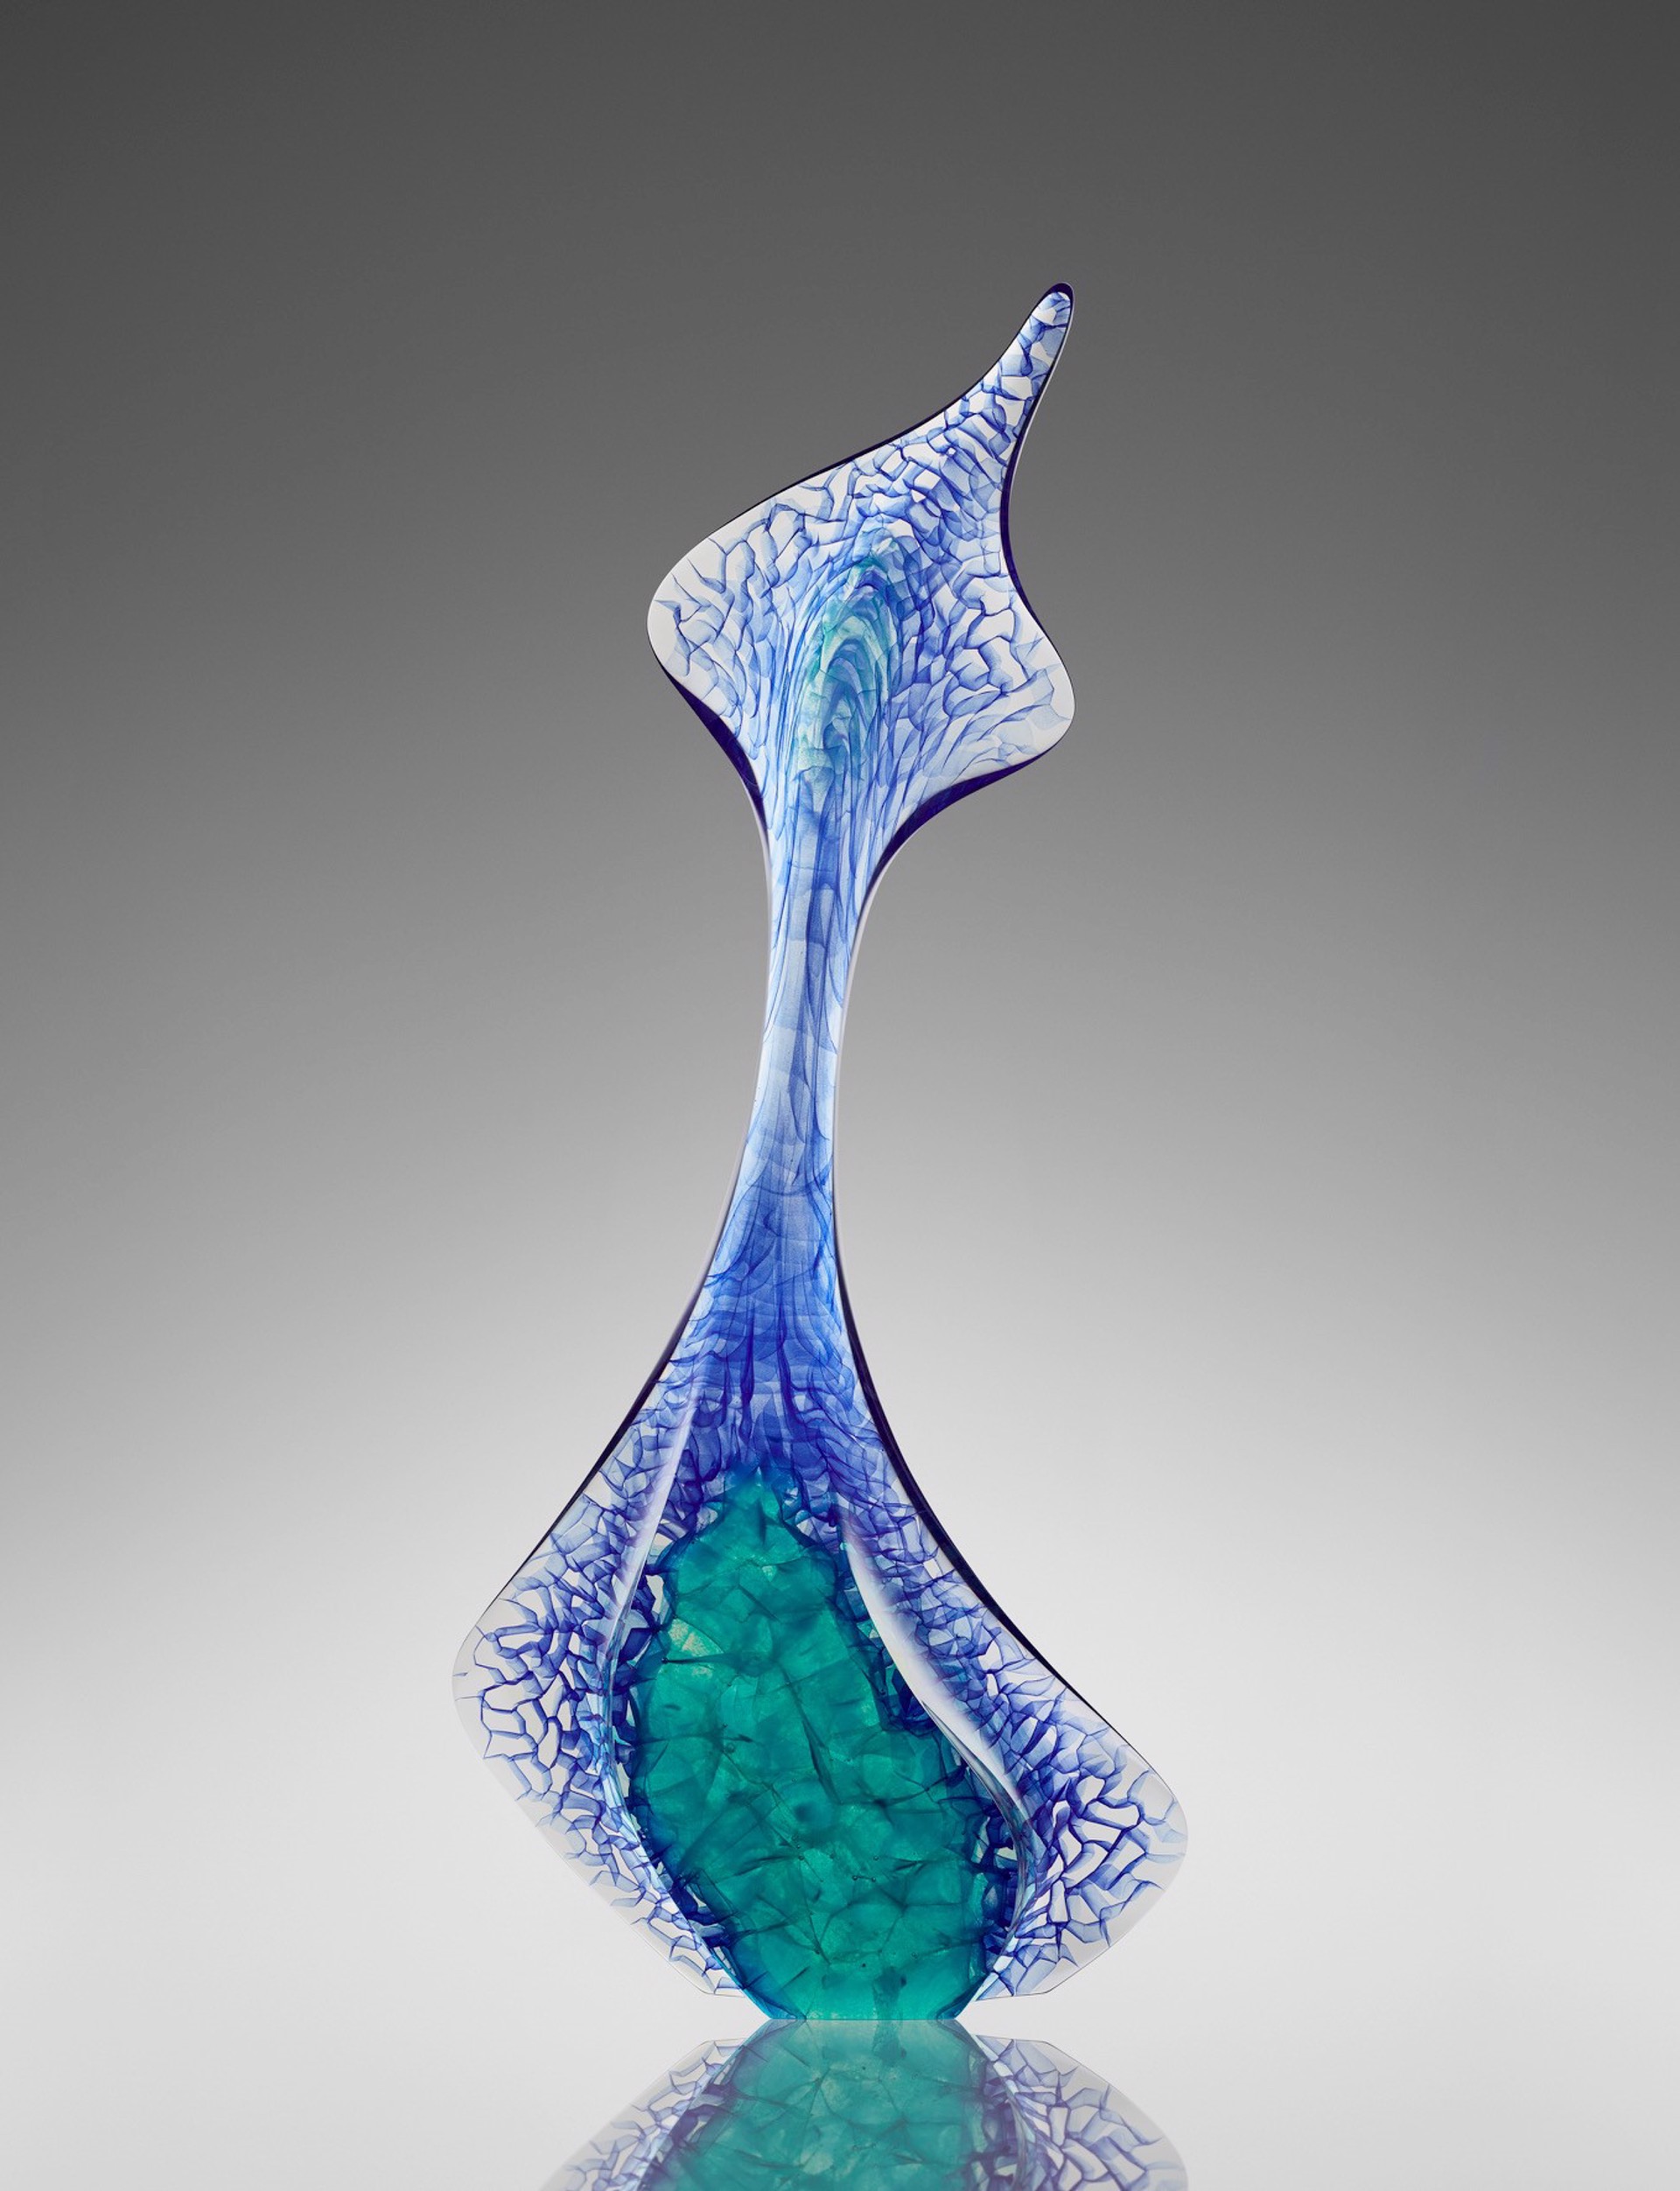 "Seaforms 288-18" by Michael Behrens